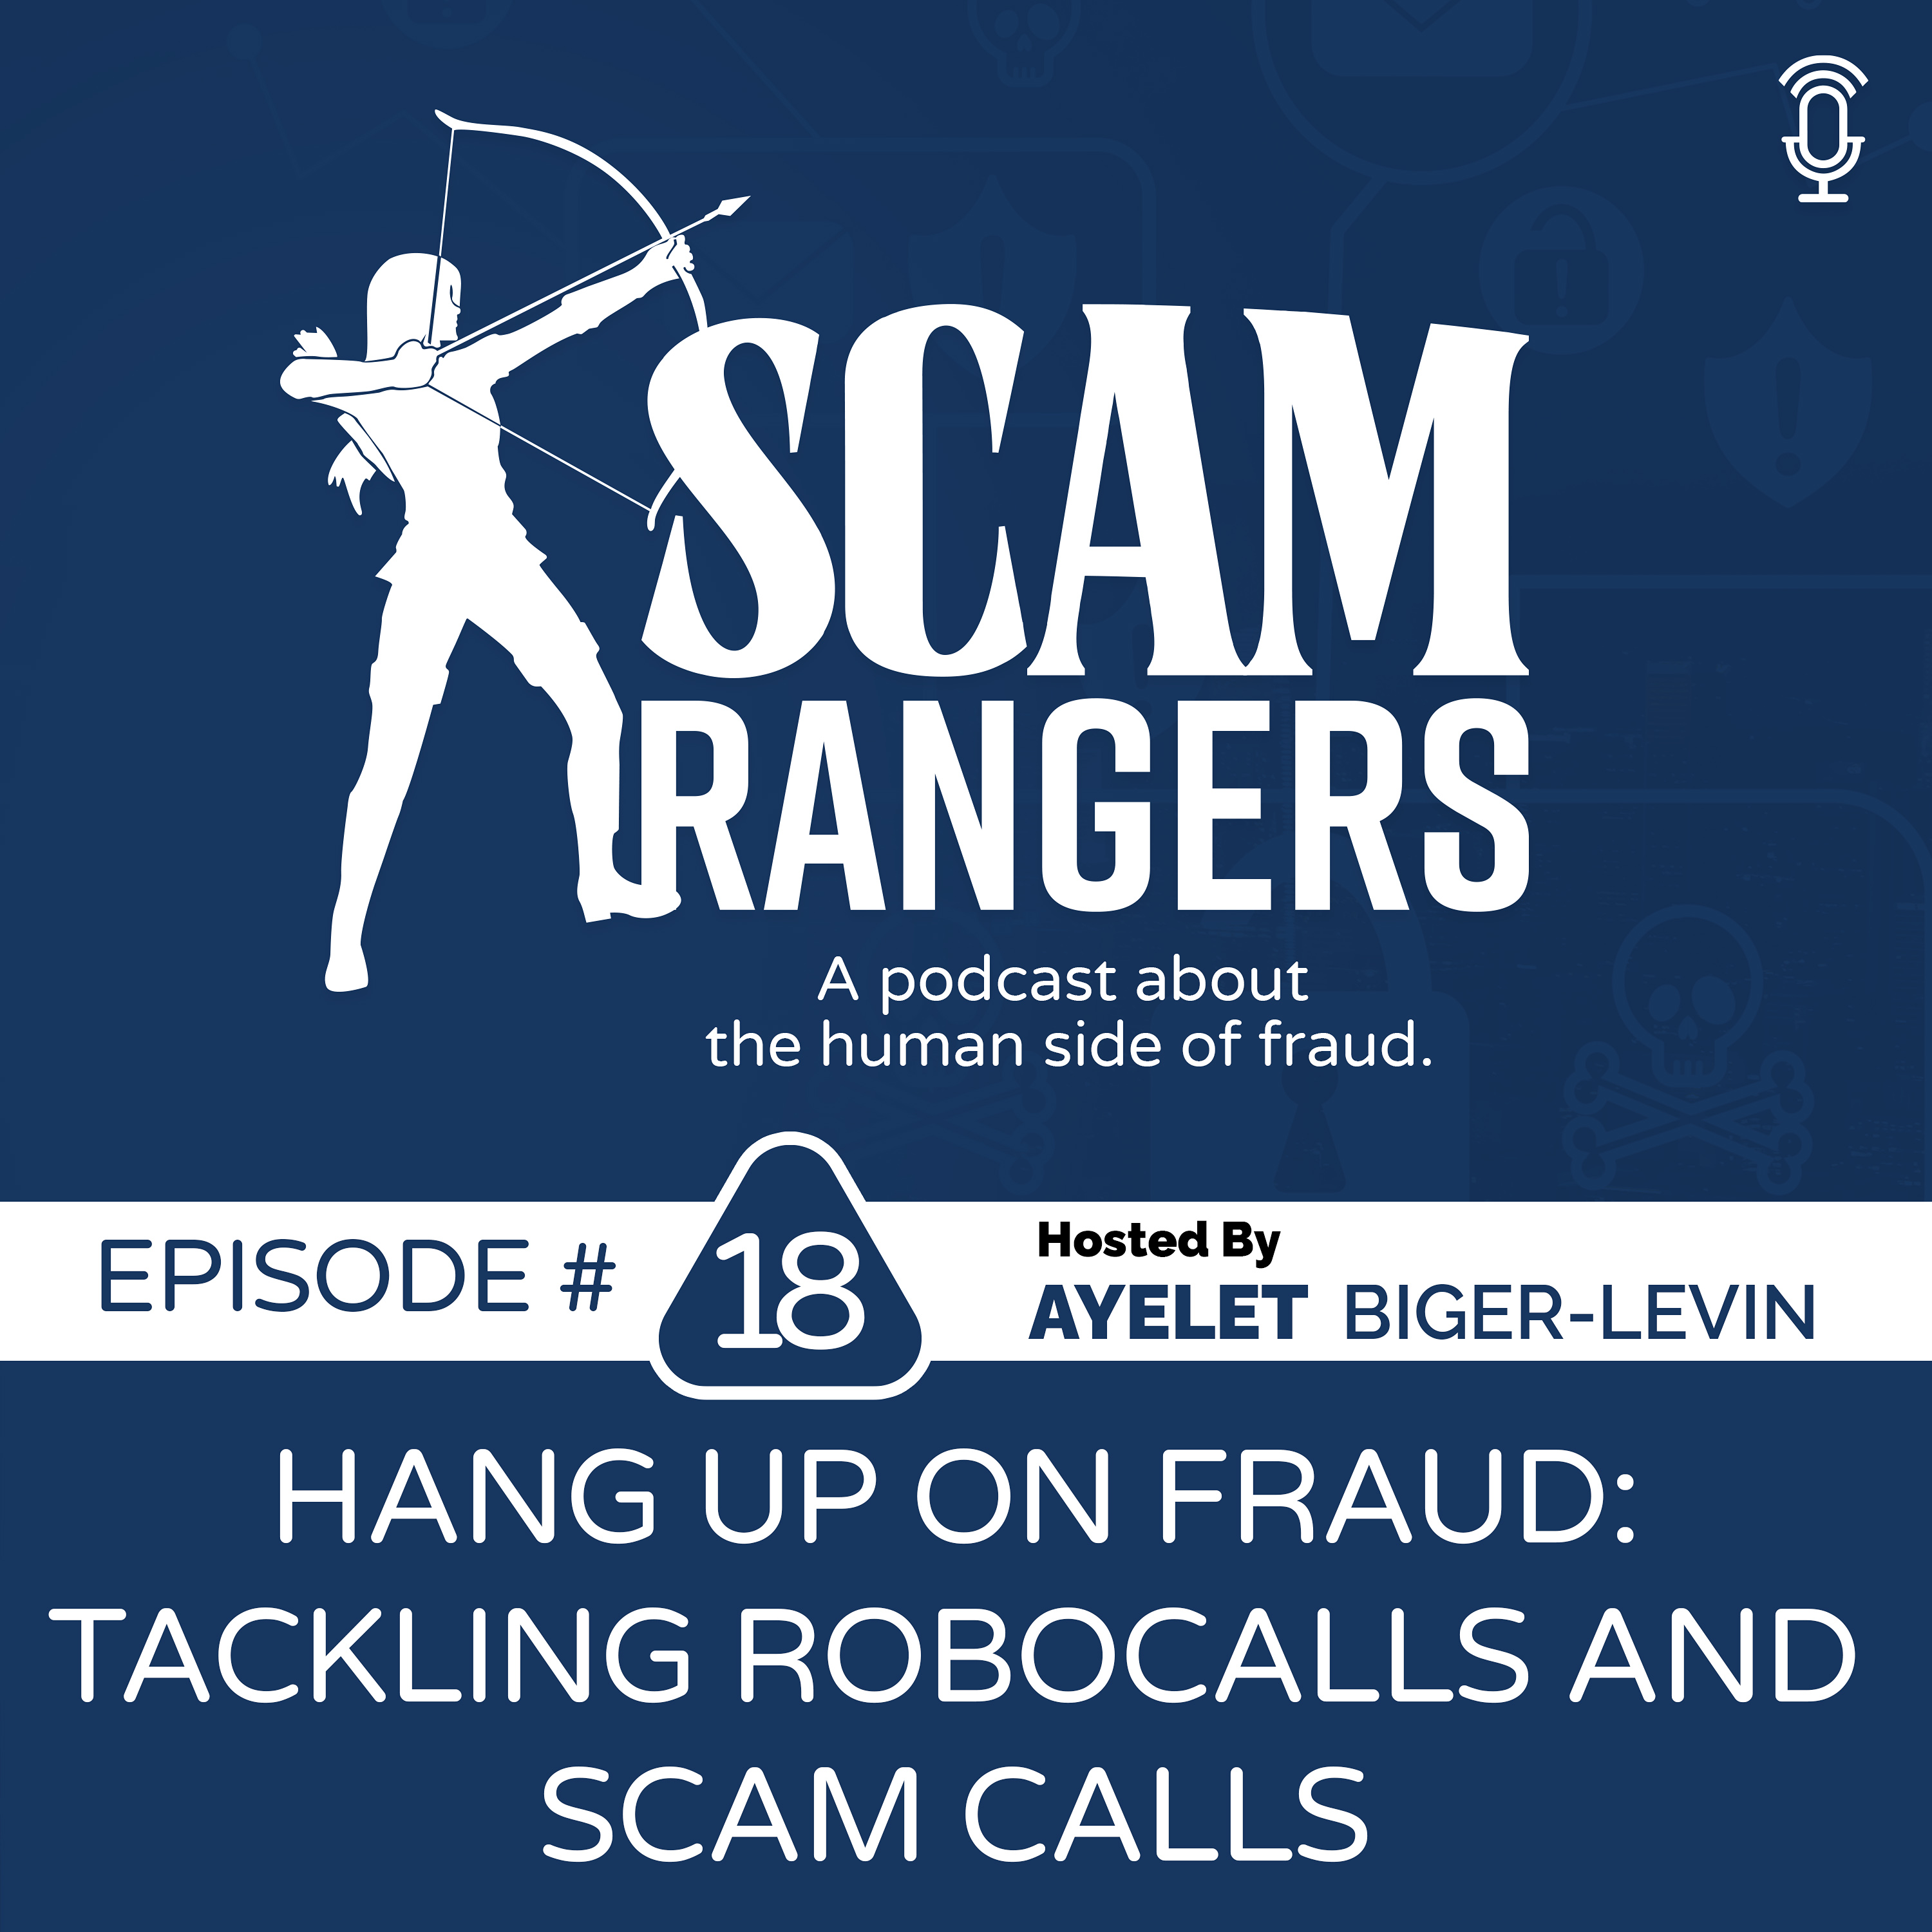 Hang Up on Fraud: Tackling Robocalls and Scam Calls, A conversation with Alex Quilici, CEO of YouMail